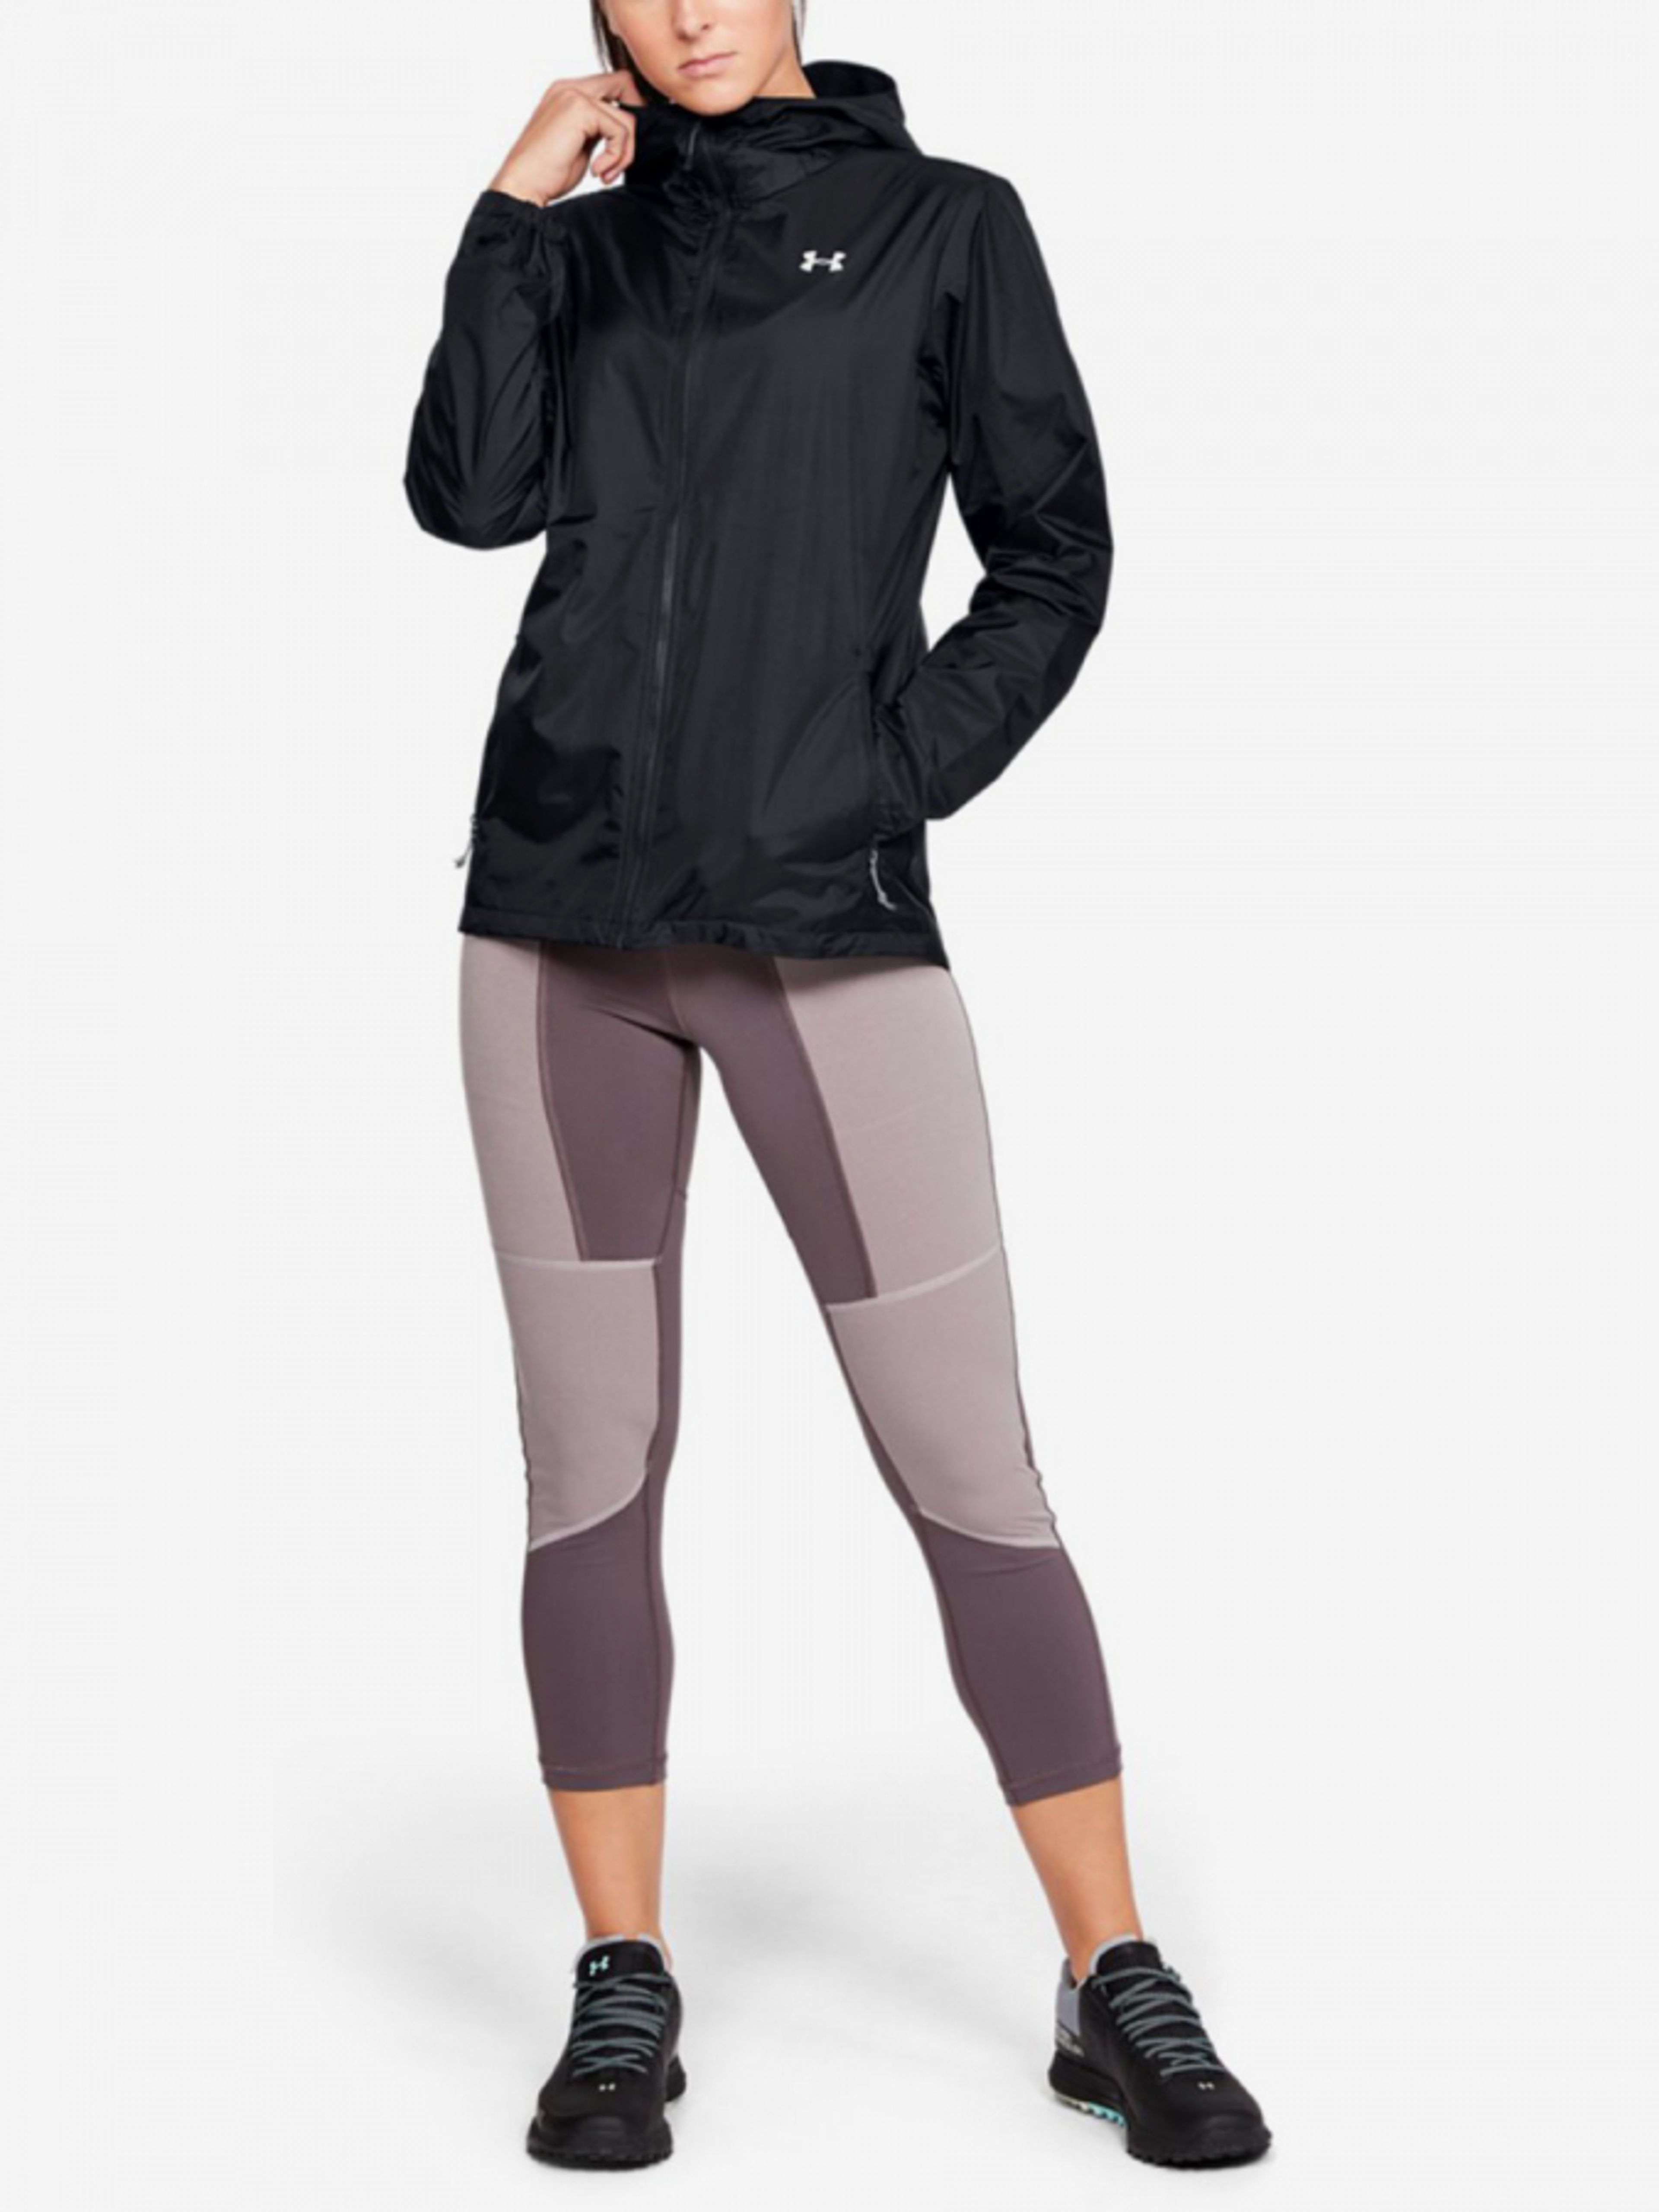 Under Armour - UA Iso-Chill Run Ankle Tight Leggings